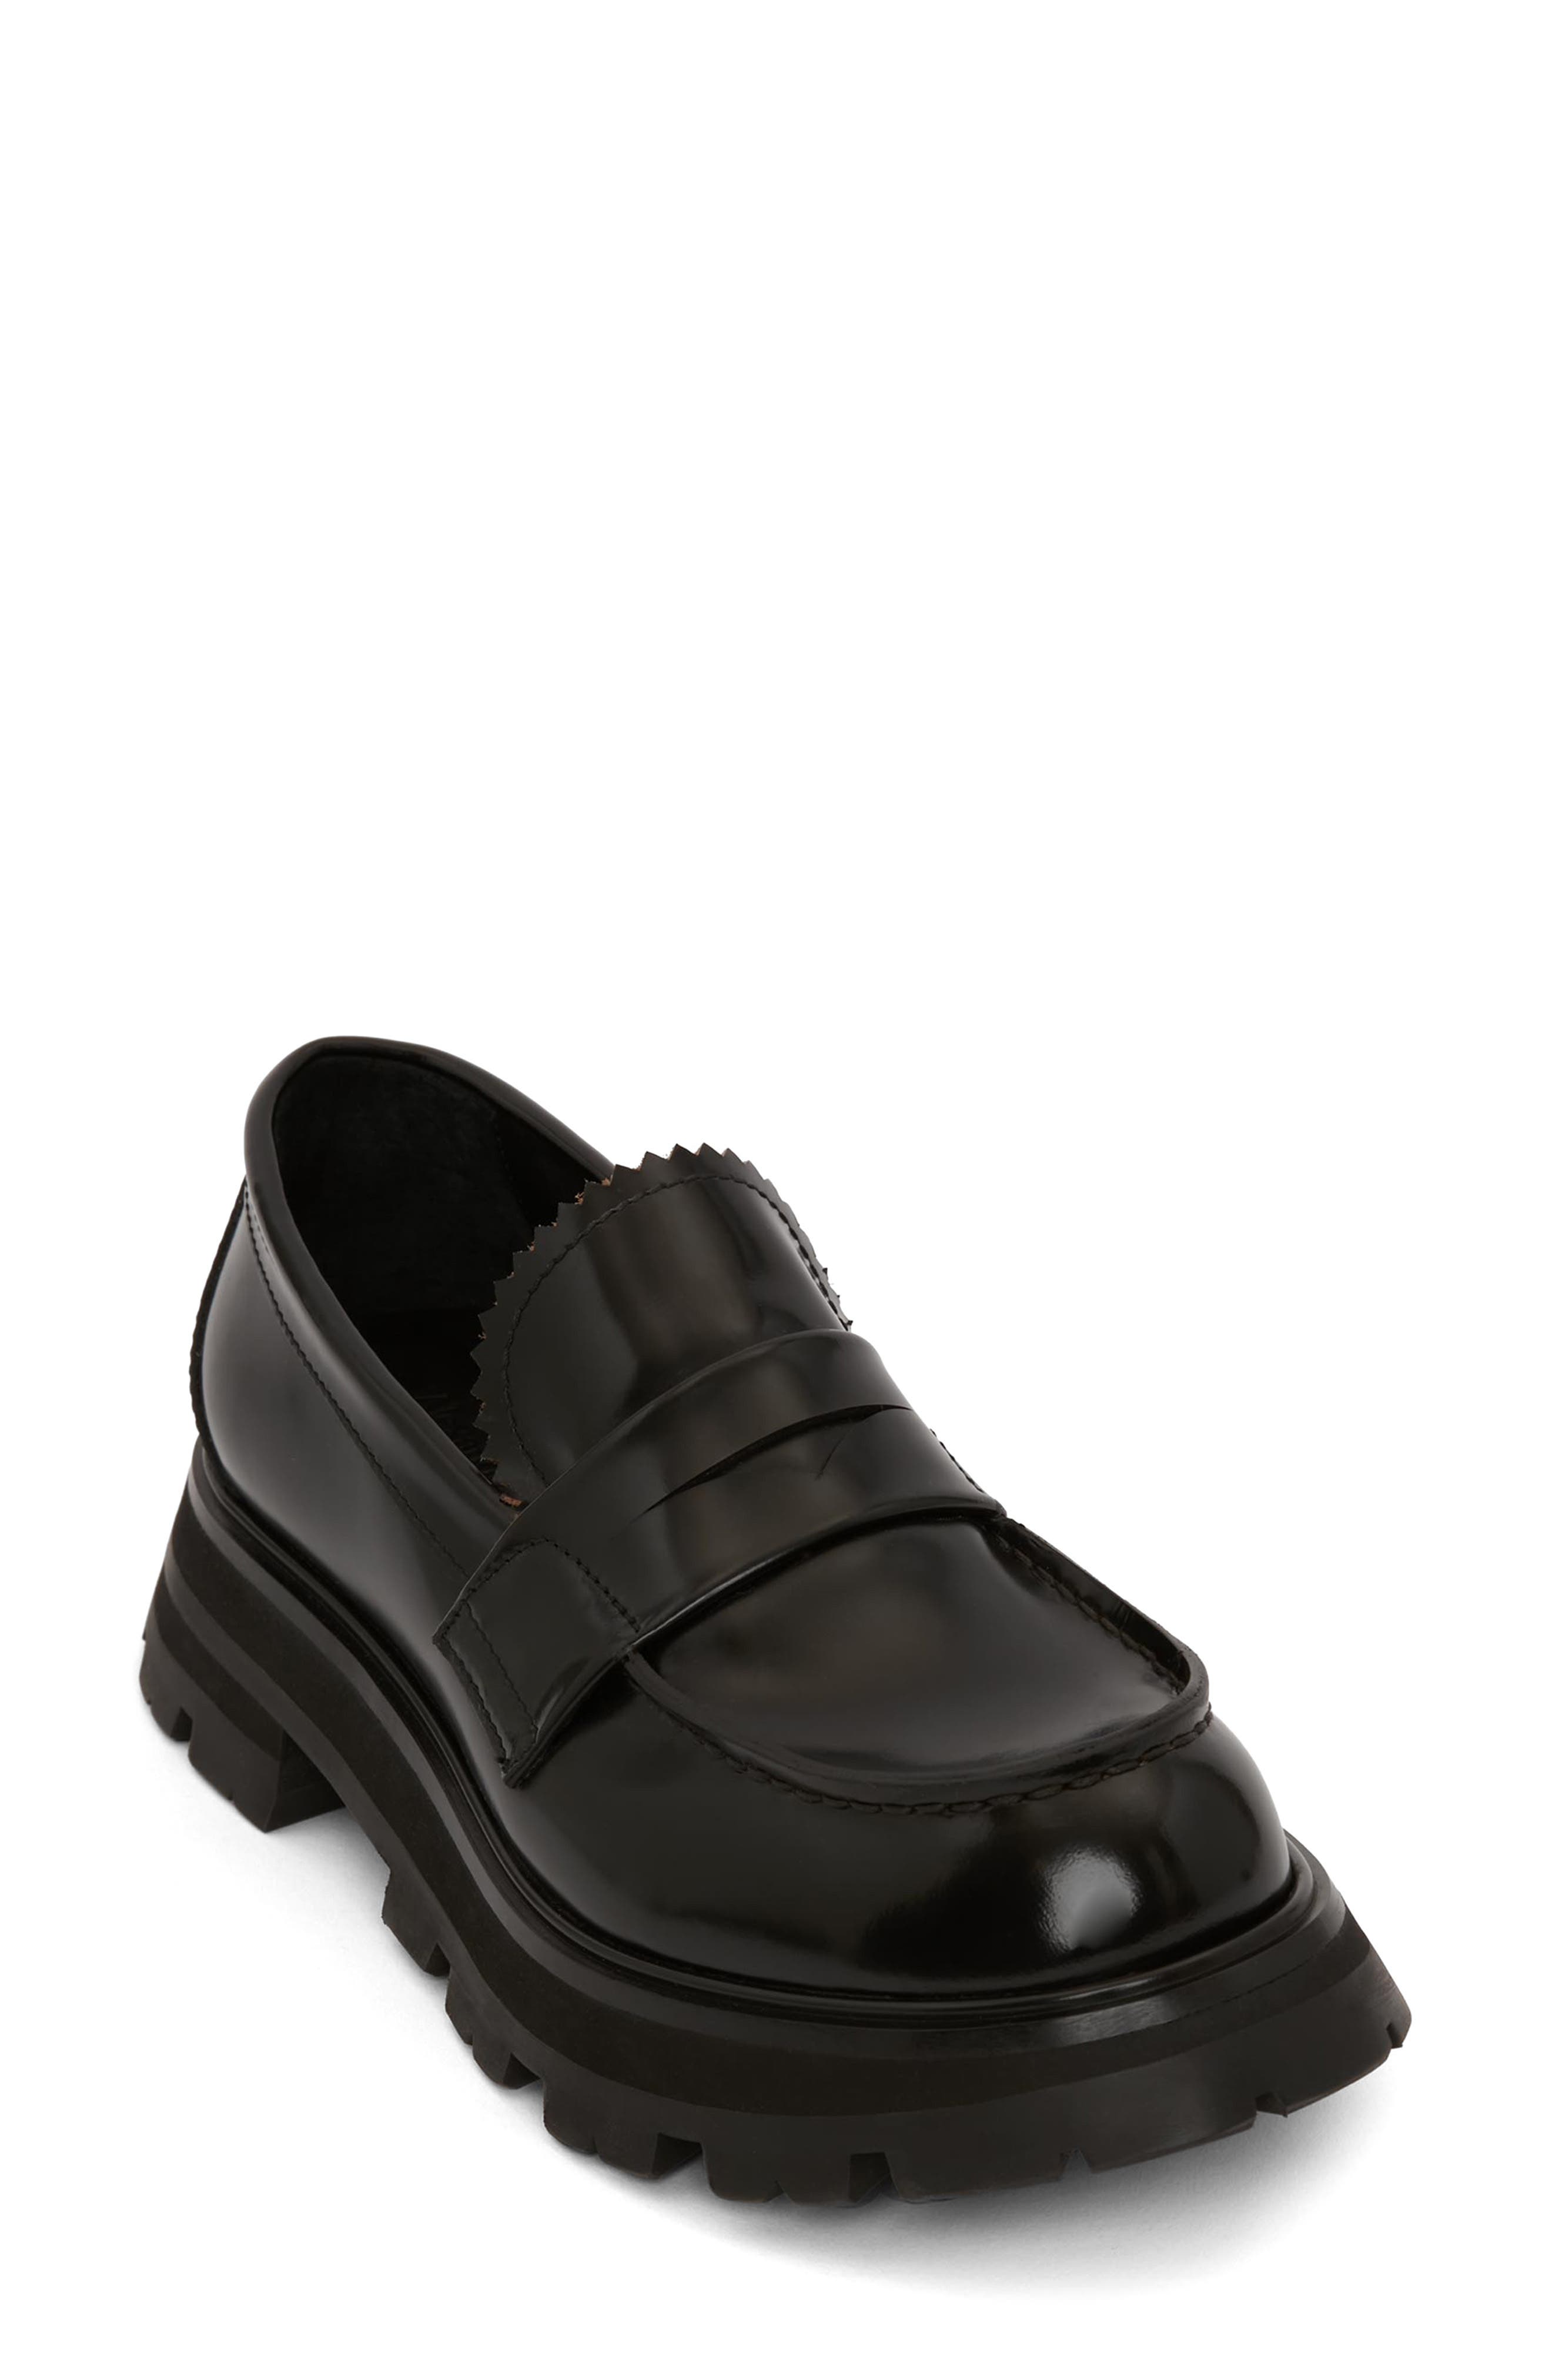 Alexander McQueen wander Loafers in Black Womens Shoes Flats and flat shoes Loafers and moccasins 